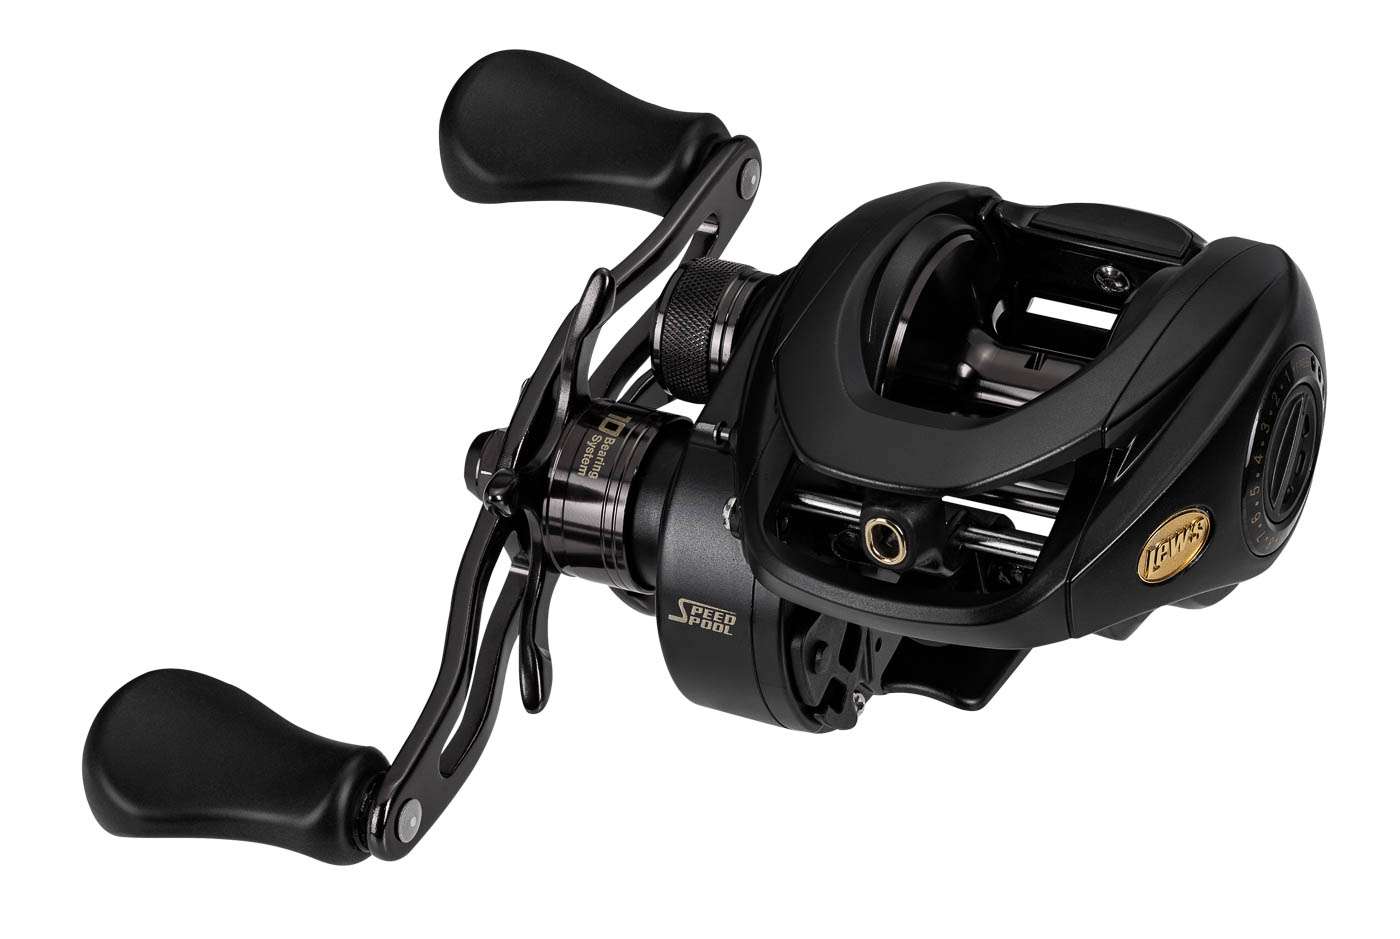 <p><strong>Lewâs BB1 Pro LFS Baitcasting Reel</strong></p><p>Upgrades to the ever-popular BB1 add an ergonomically, tapered and lightweight aluminum frame with graphite side plates and Lewâs new custom paddle grips. What sets the BB1 Pro LFS apart is the performance of the 27-position QuietCast Adjustable Centrifugal Braking System, delivering precise control of spool breaking and exceptional casting. An additional feature on the BB1 Pro LFS is the dual stage titanium-coated line guide, which is positioned farther away from the spool for reduced line friction and maximized casting performance. The new BB1 Pro LFS Baitcast reel is available in three gear ratios.  The PRO1H model sports a 6.2:1 ratio.  Most anglers favor the 6.2:1 ratio for deep cranking, though it also performs well with spinnerbaits, swim baits and a bladed jig like the Strike King Thunder Cricket.  The 7.5:1 gear ratio makes for an exceptional multipurpose reel perfect for jerkbaits, topwaters and a variety of applications. Available fall 2021. $199.99. <a href=